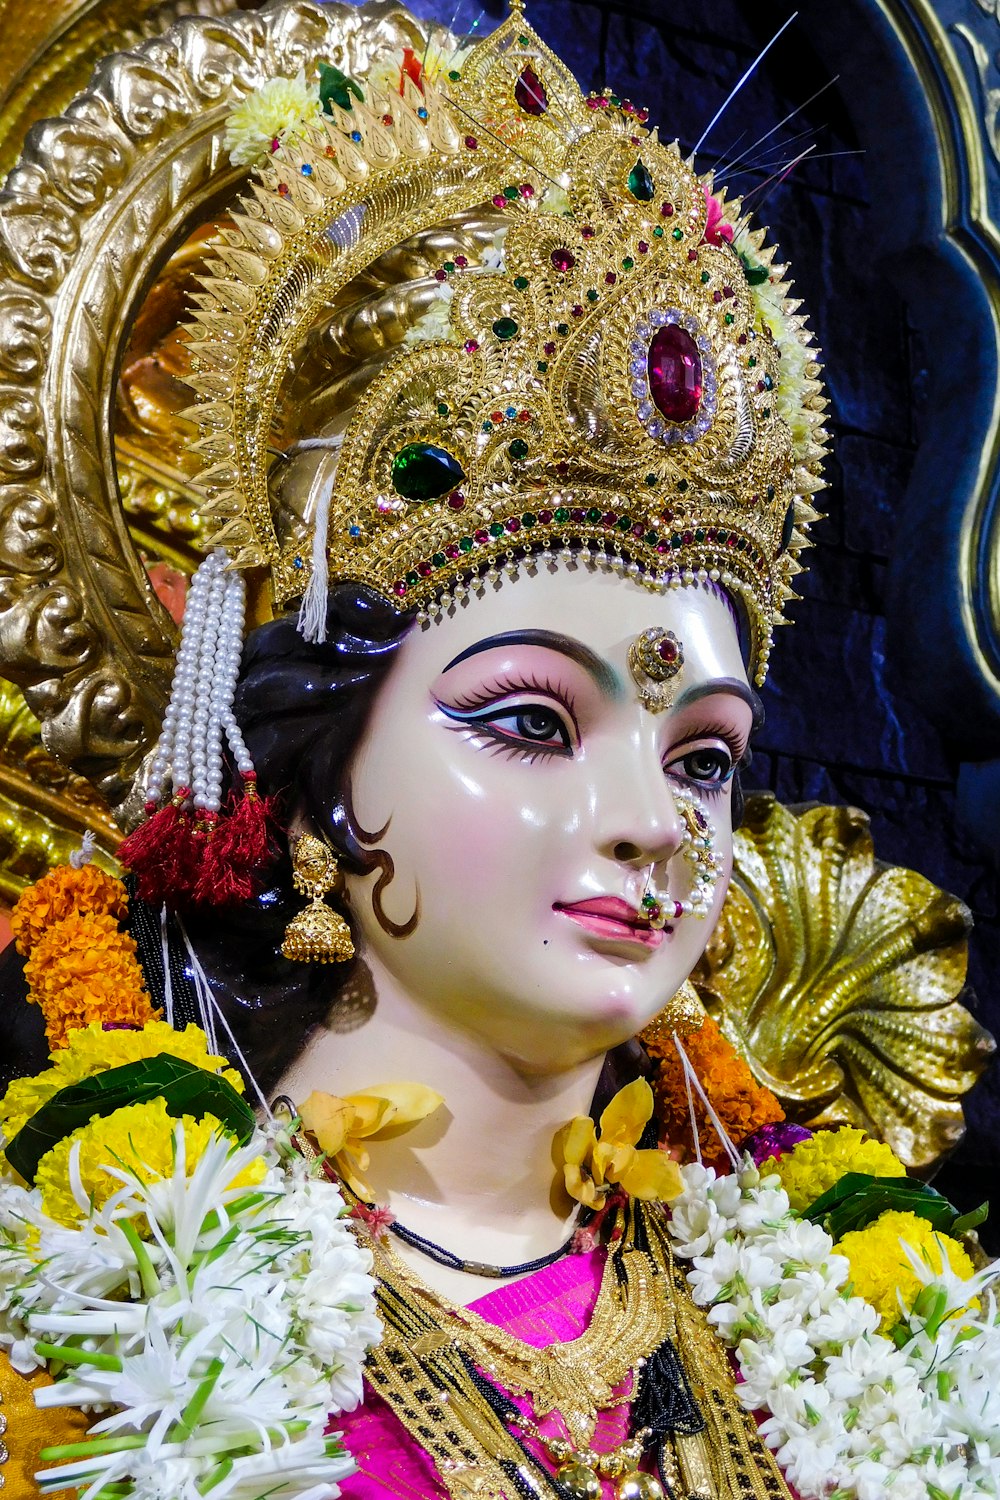 Astonishing Collection of Durga Devi Images in Full 4K – Over 999 Renderings